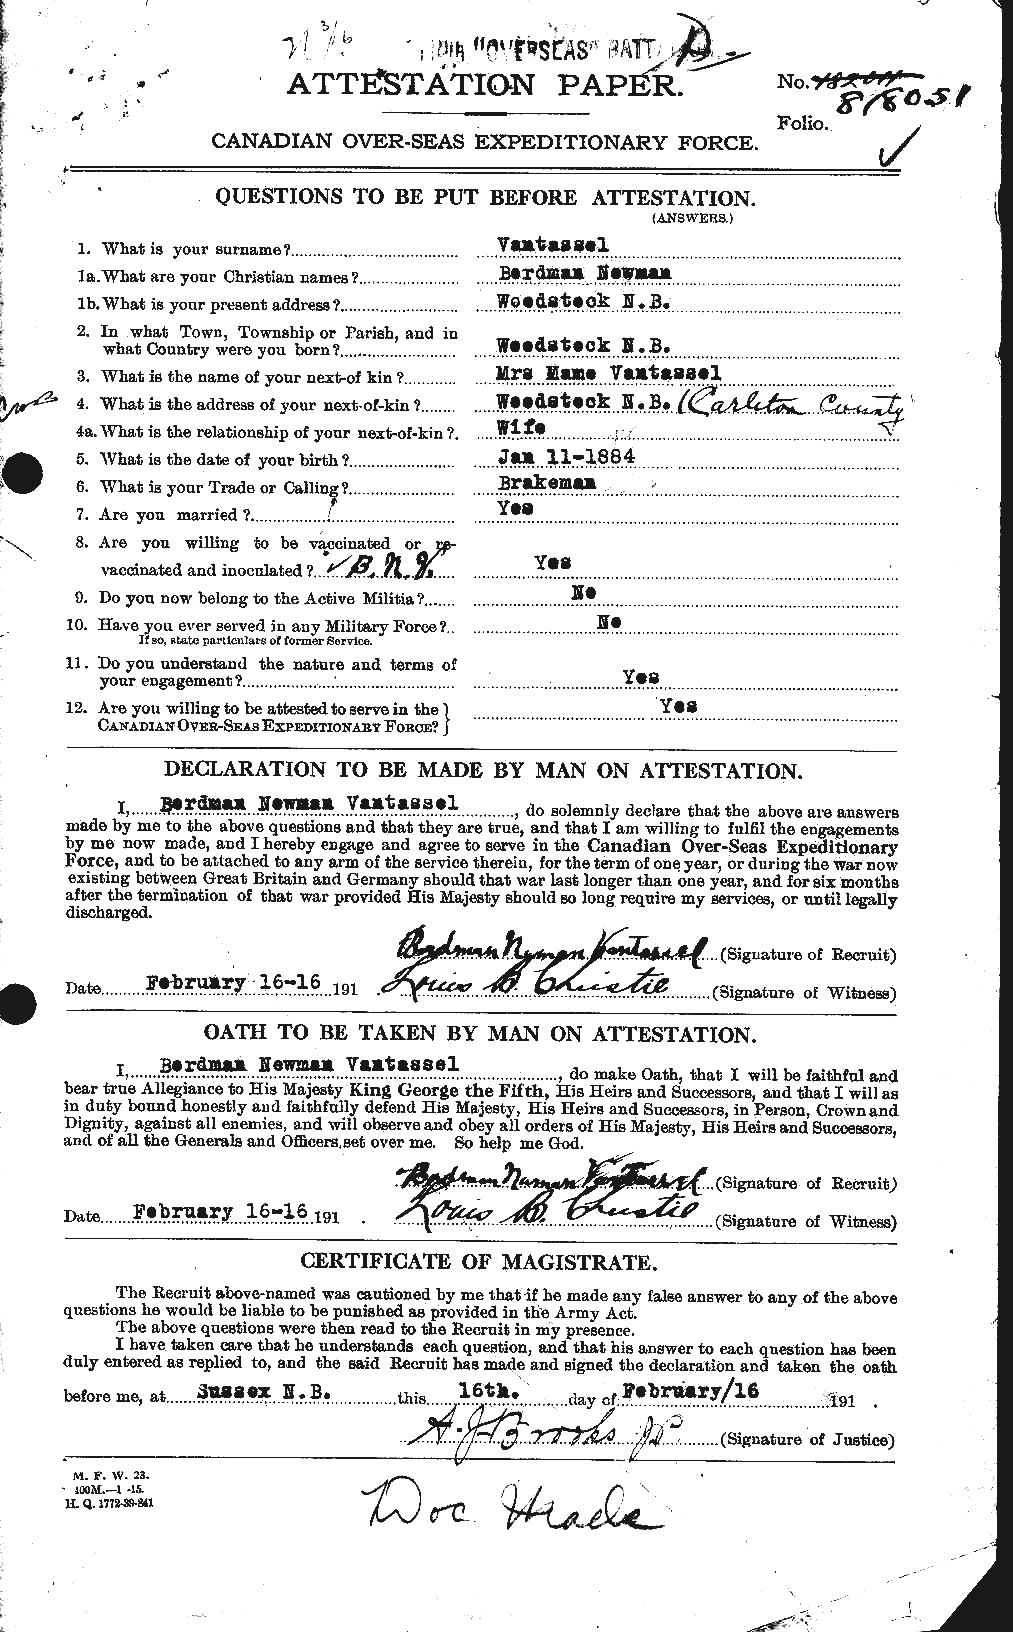 Personnel Records of the First World War - CEF 648953a